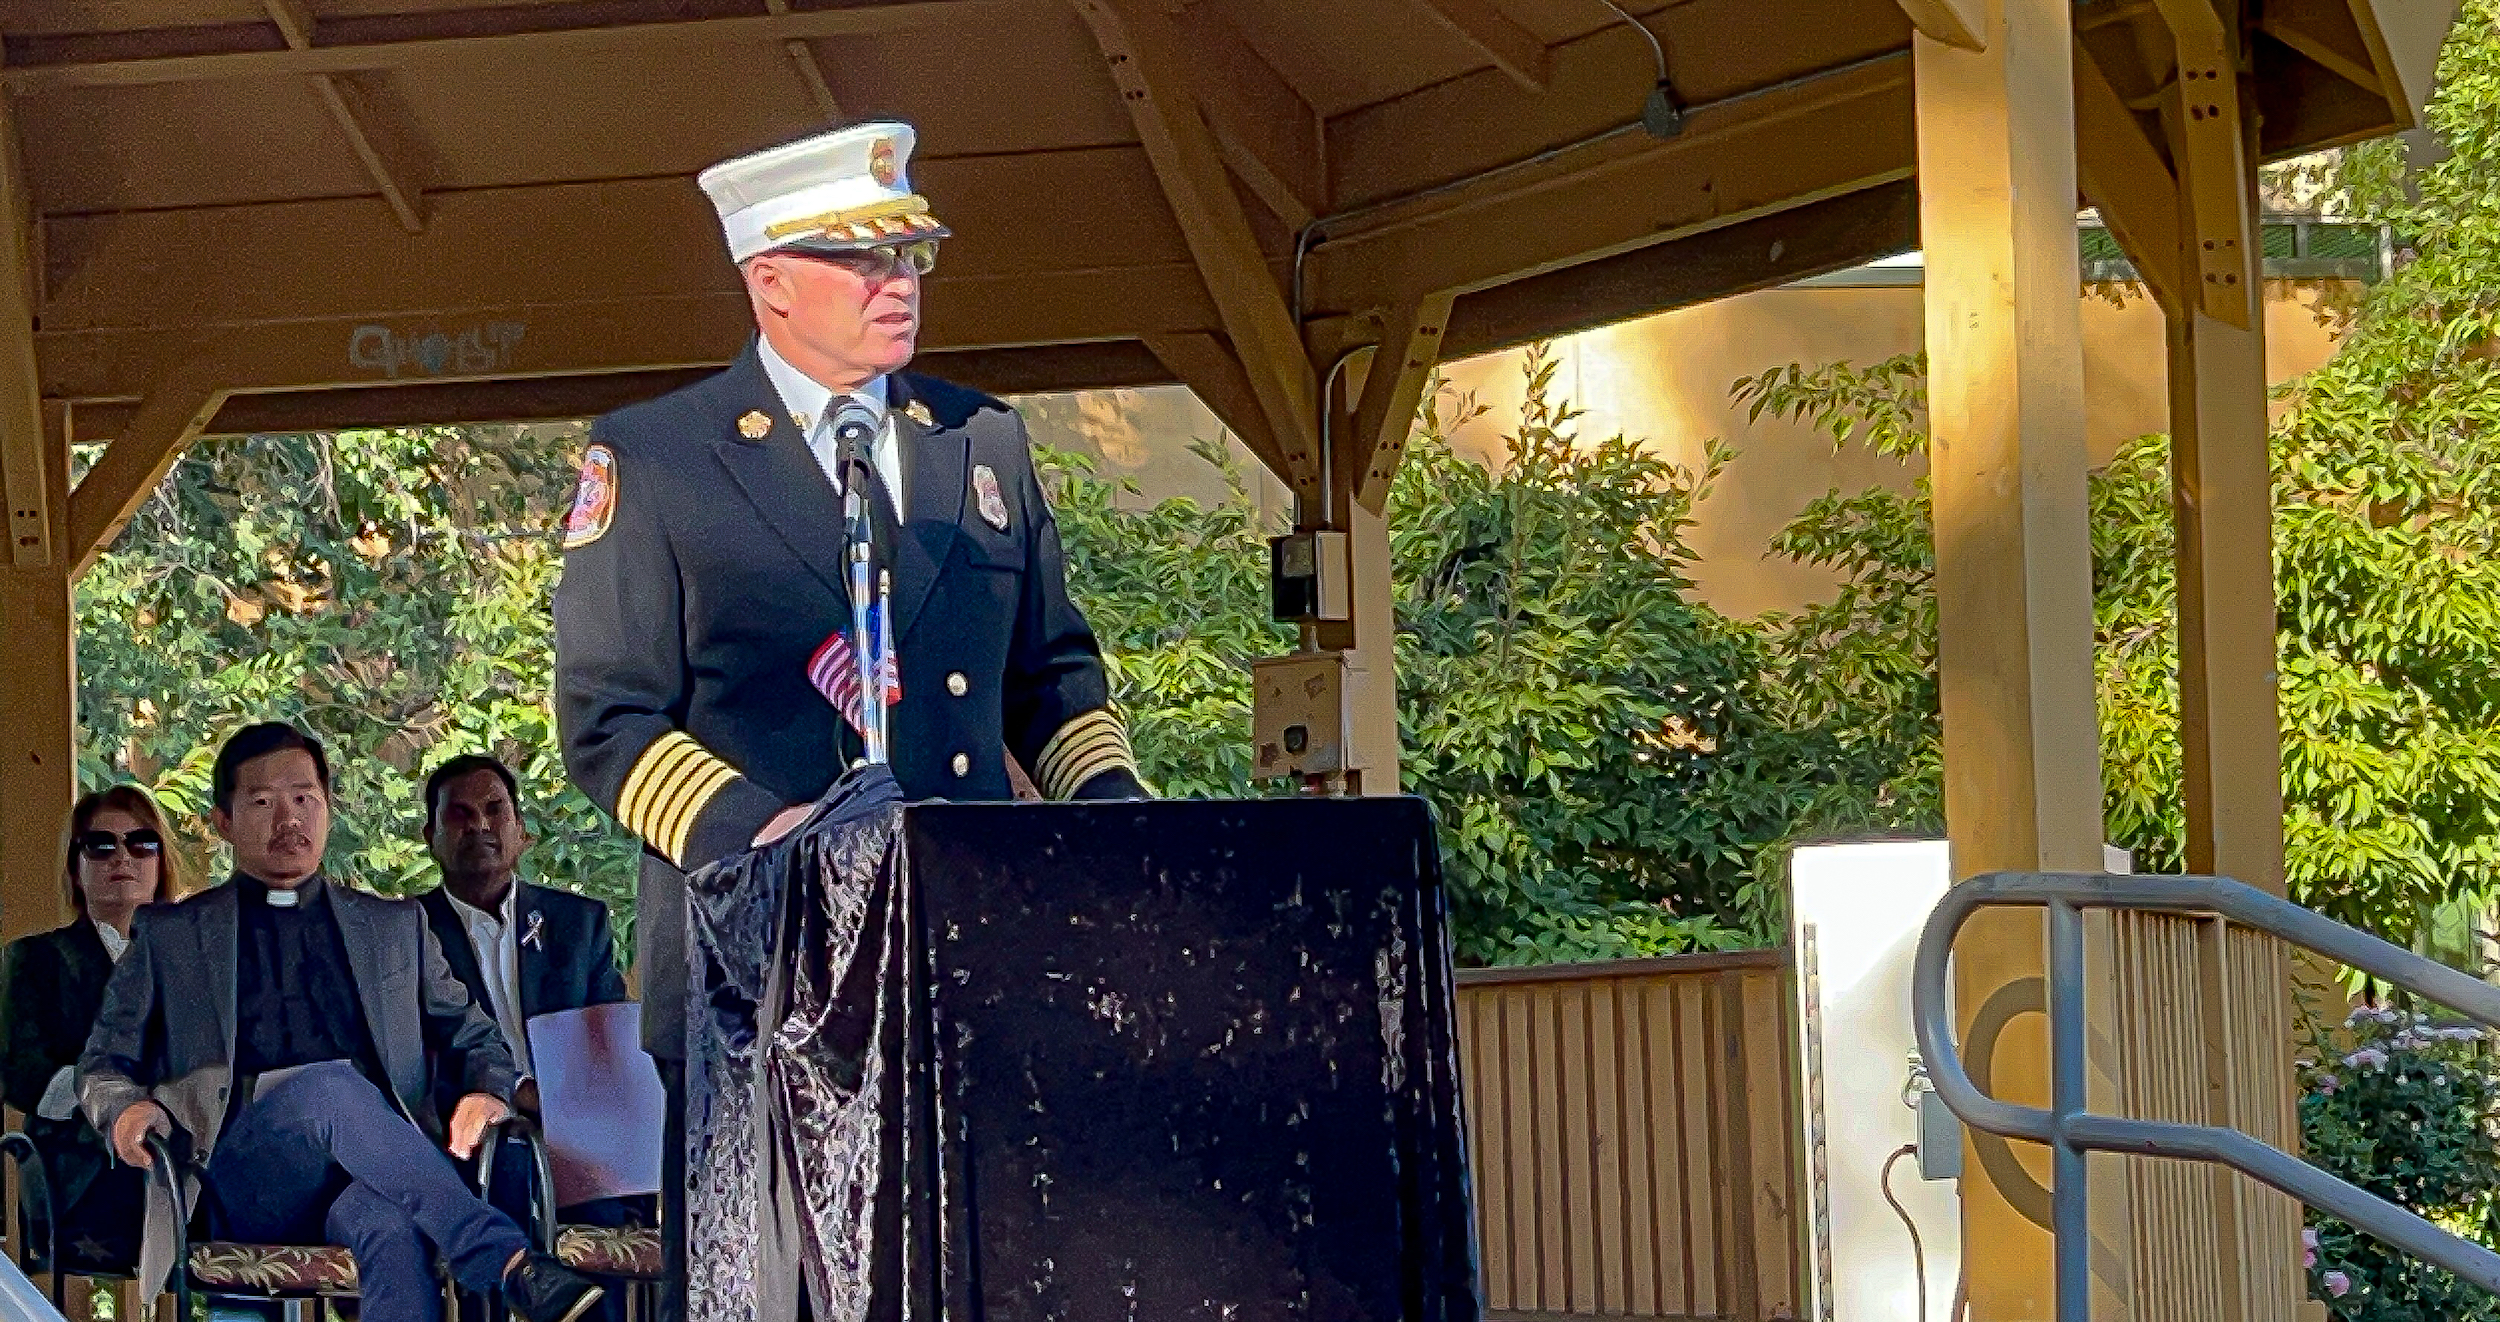 VIDEO: 22-years later, Folsom remembers the fallen of 9/11 